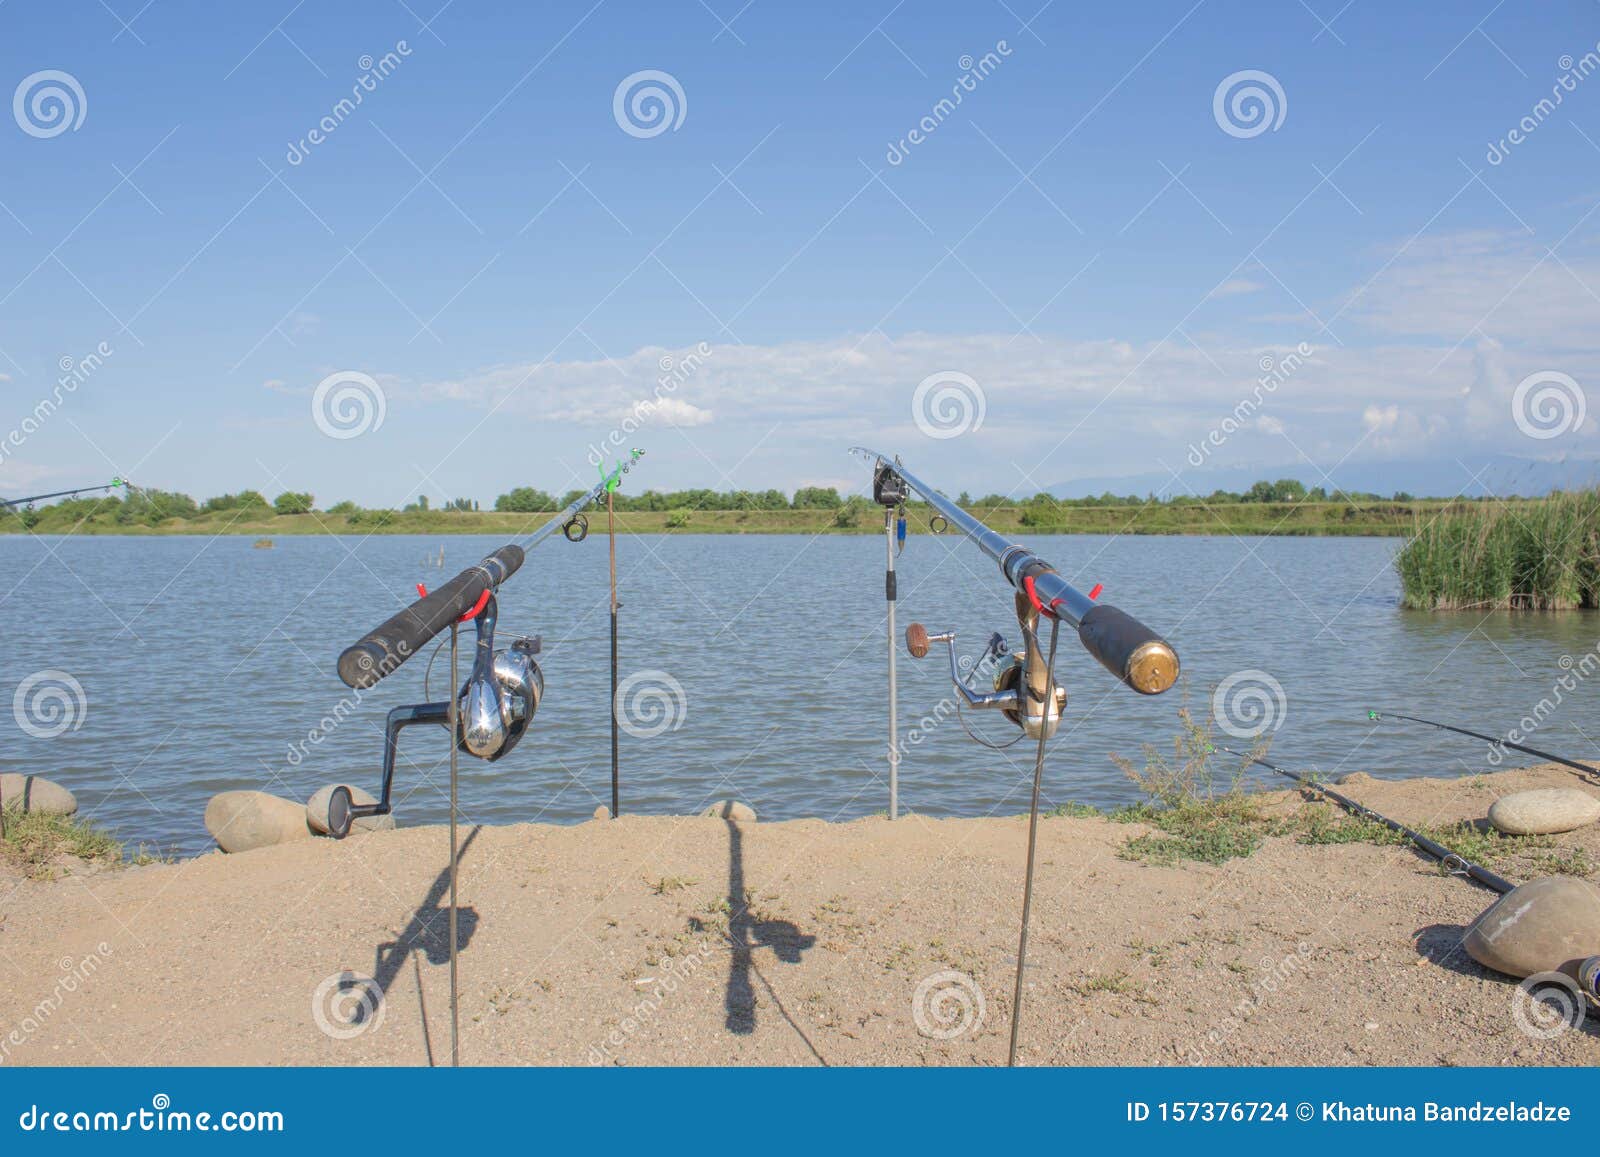 Fishing Reel on the Rod. Fishing Rods Held in Fishing Rod Holders